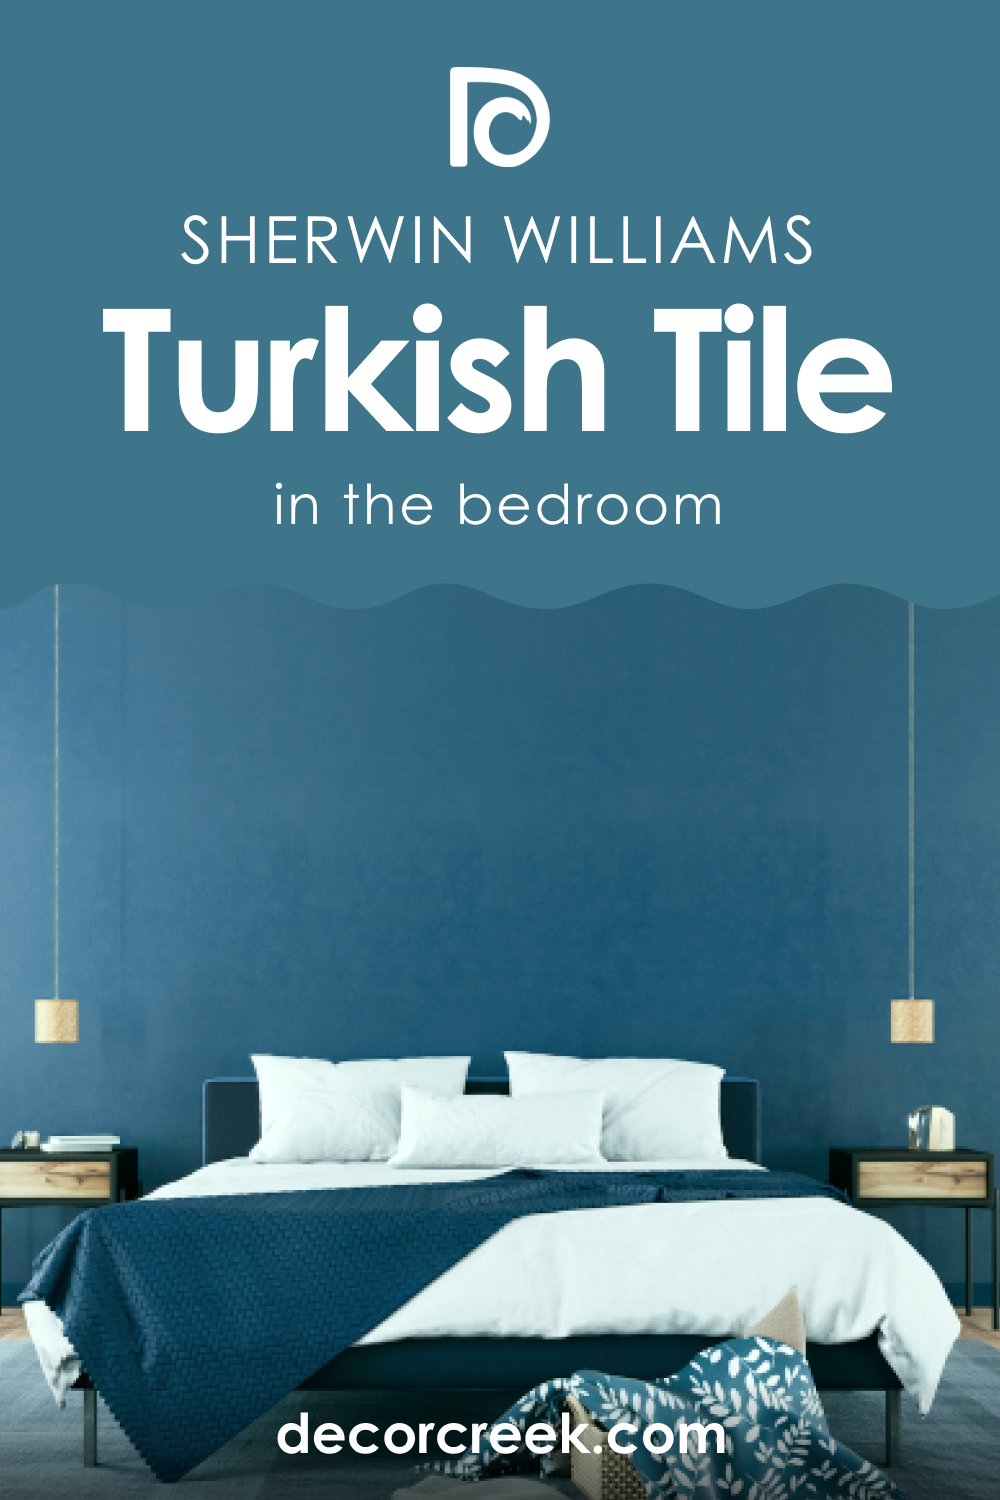 How to Use SW 7610 Turkish Tile in the Bedroom?